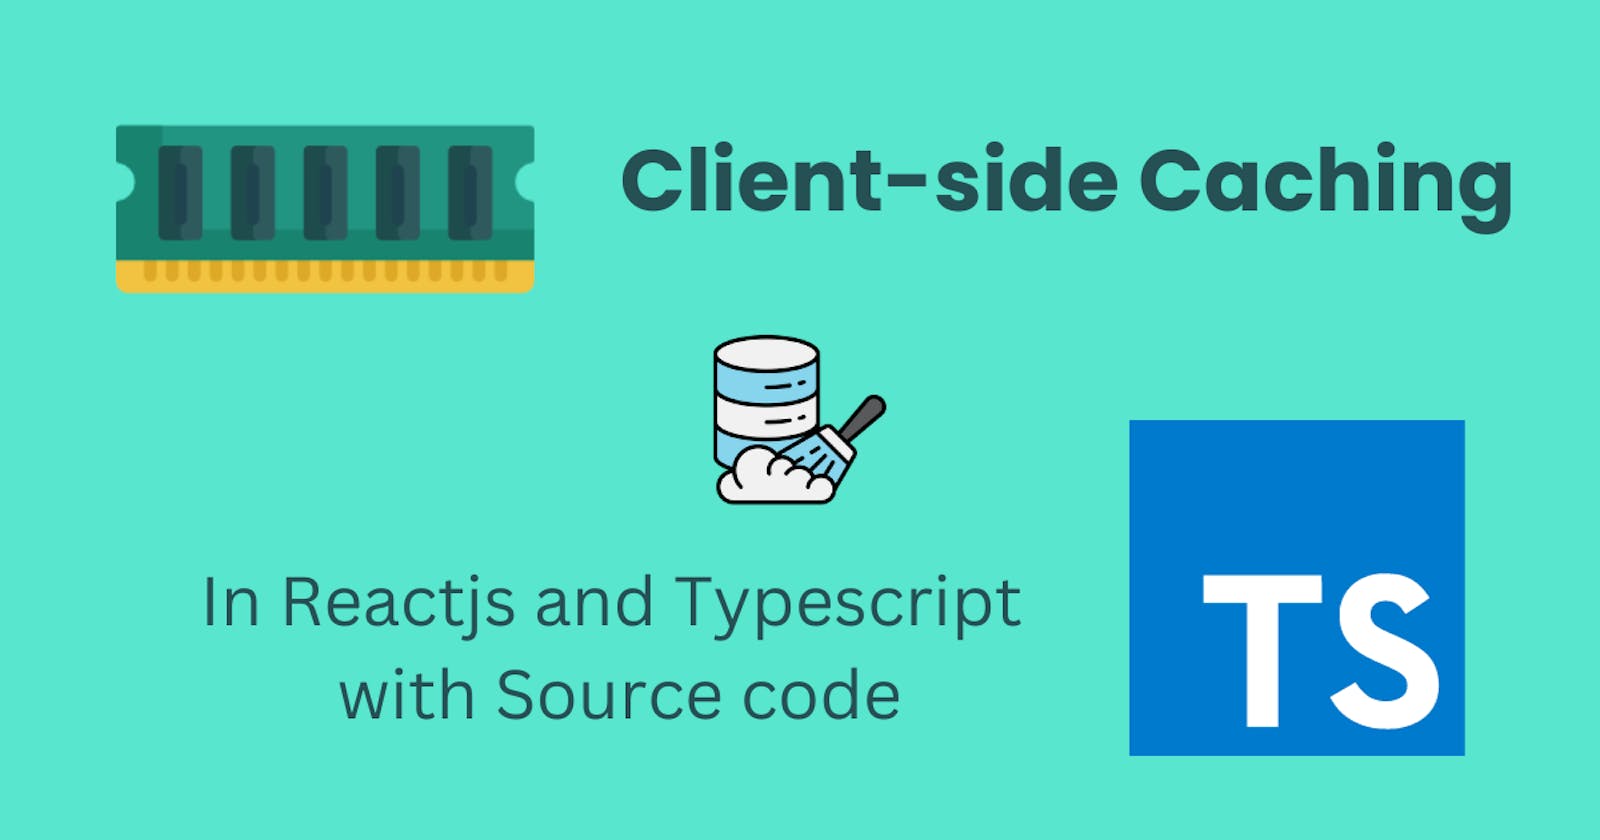 Client-side Caching in React with Typescript